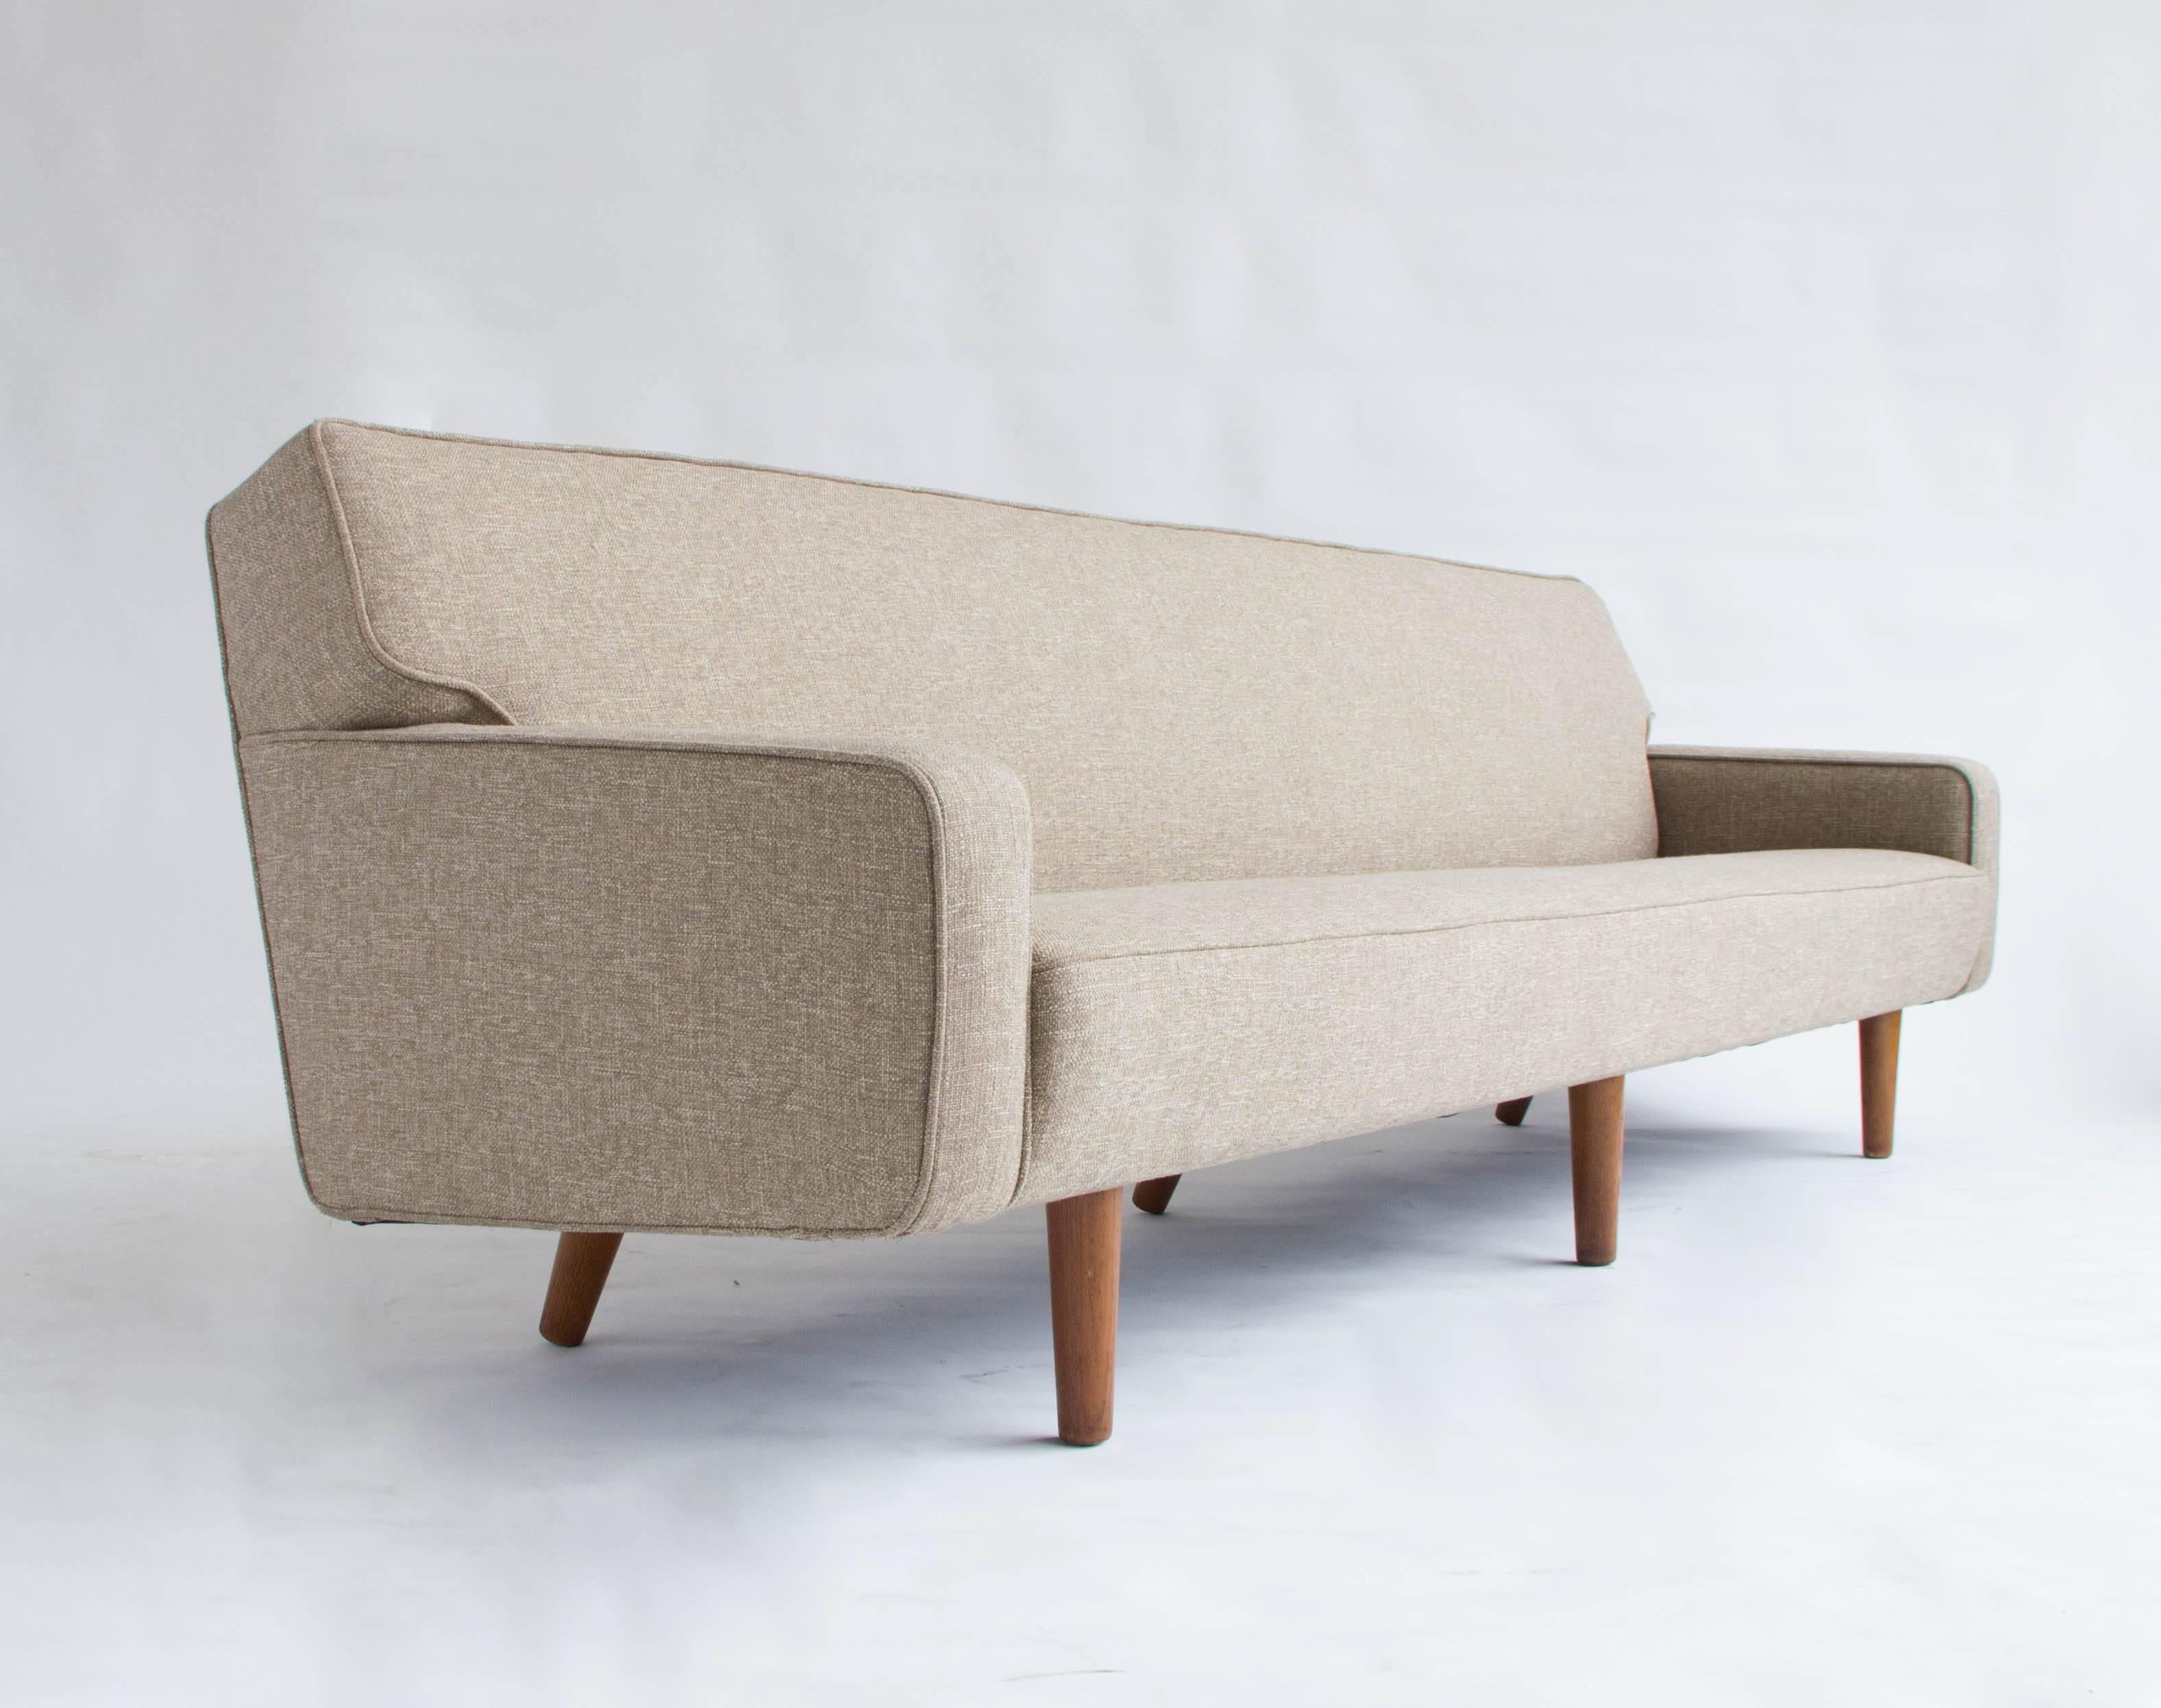 Perfectly restored AP33 model sofa, designed by Hans Wegner for AP Stolen in the 1950s. The integrated seat and backrest lend a streamlined effect and the piece is fully finished on the back to allow free-standing installation if desired. Piece has